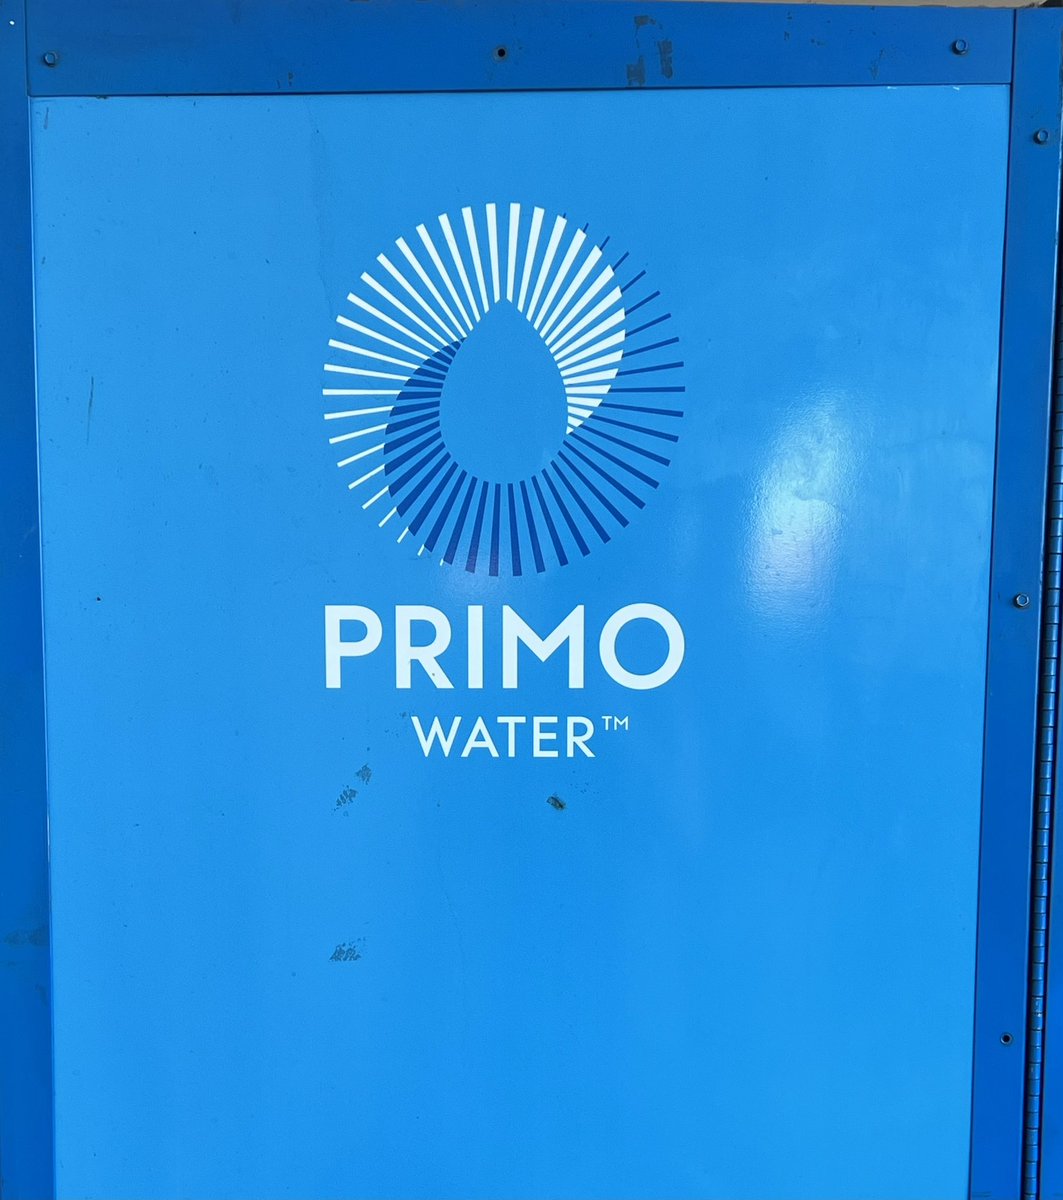 @SheaSerrano check it, the most vital compound for human life, Water, is repping #Primo
#greatshow #PrimOH2O